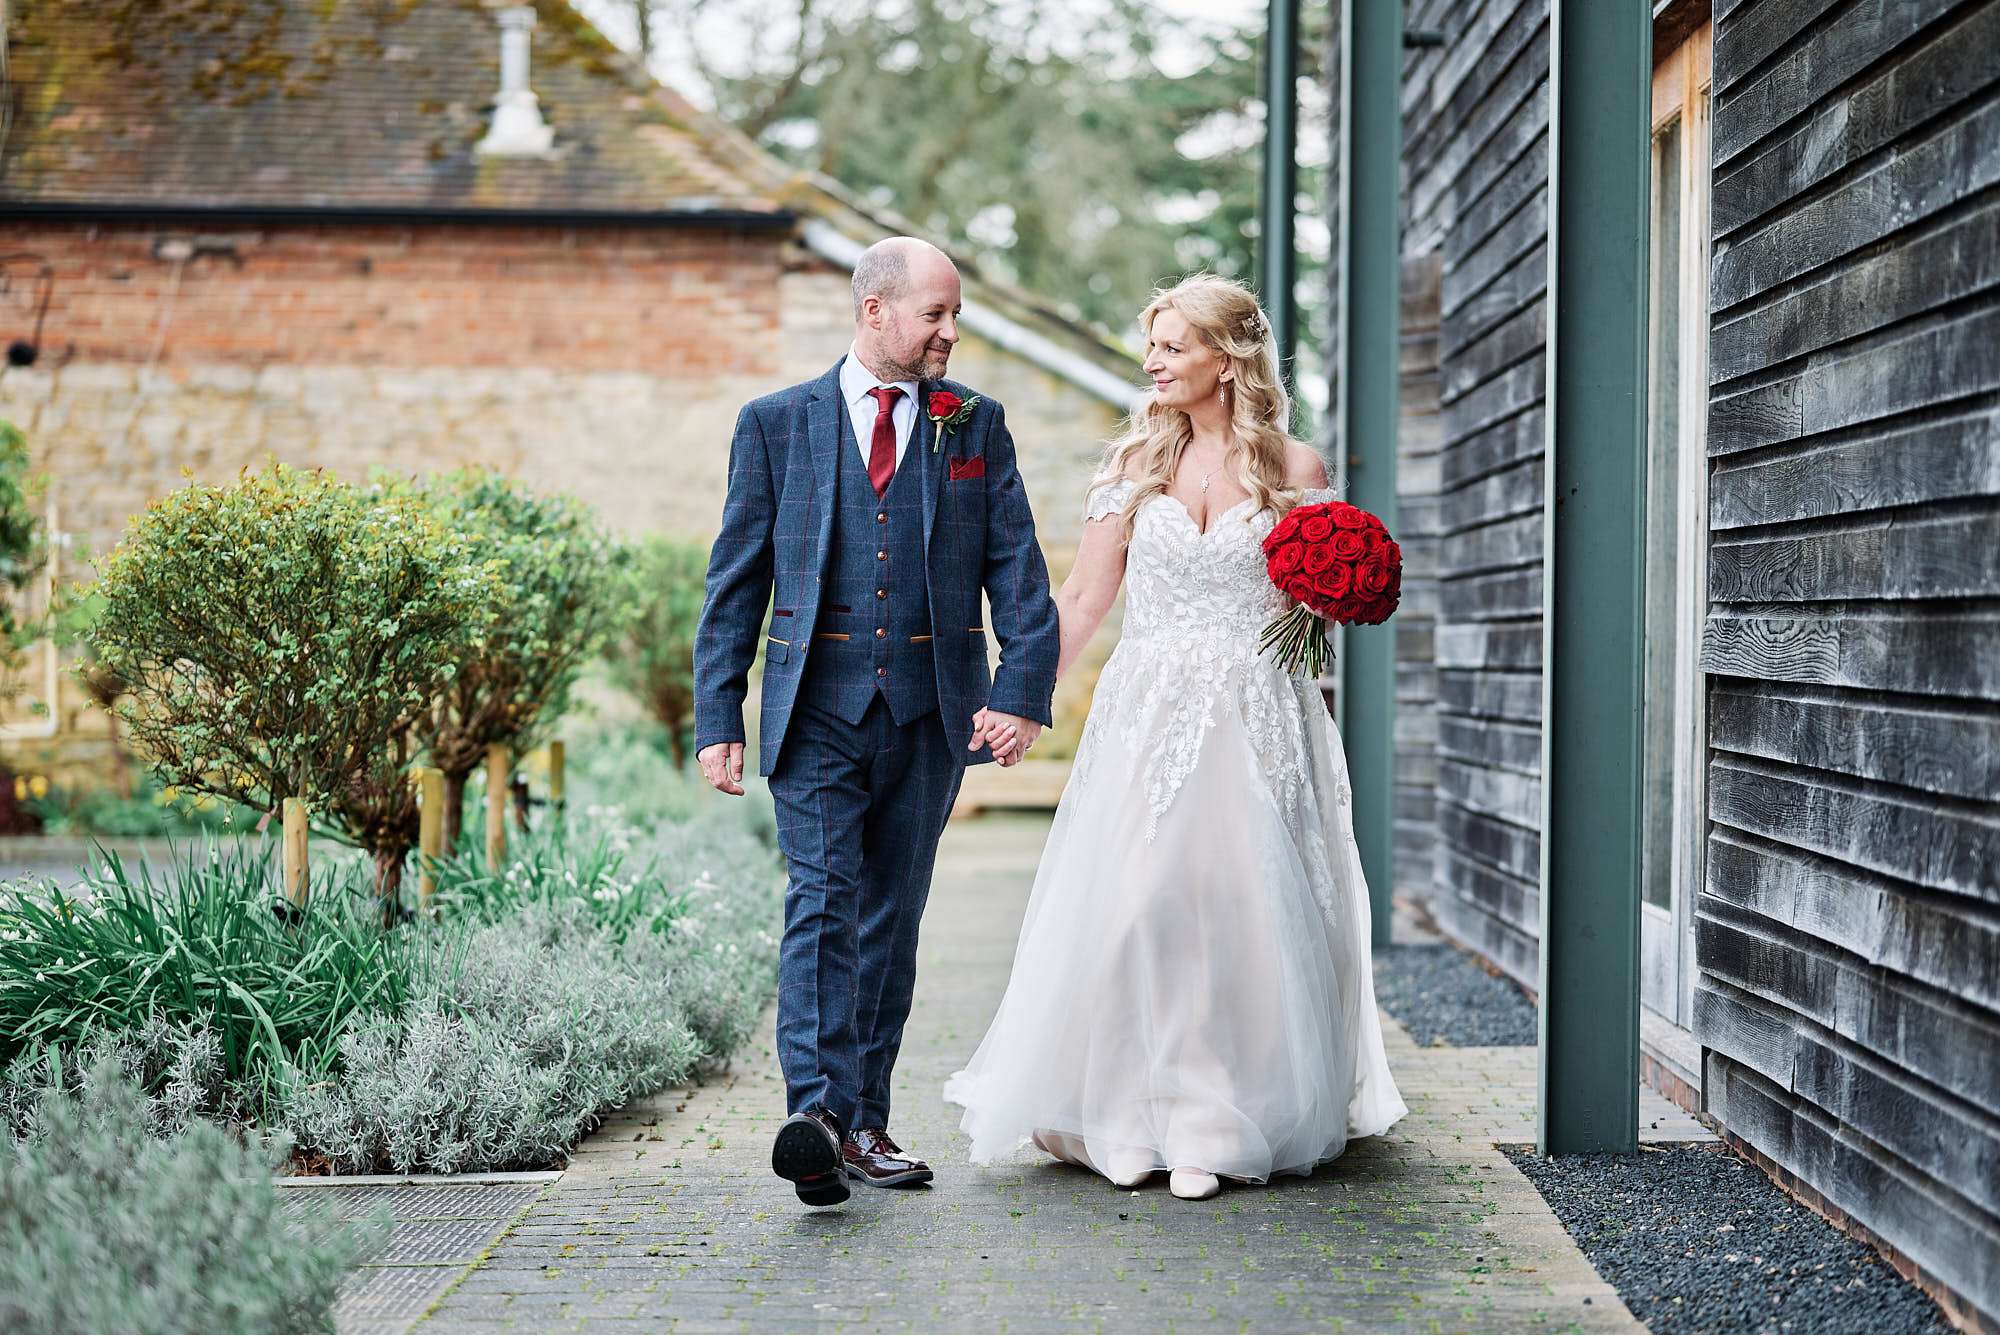 Louise & Paul’s Wedding Photography at Eckington Manor Pershore, Worcestershire